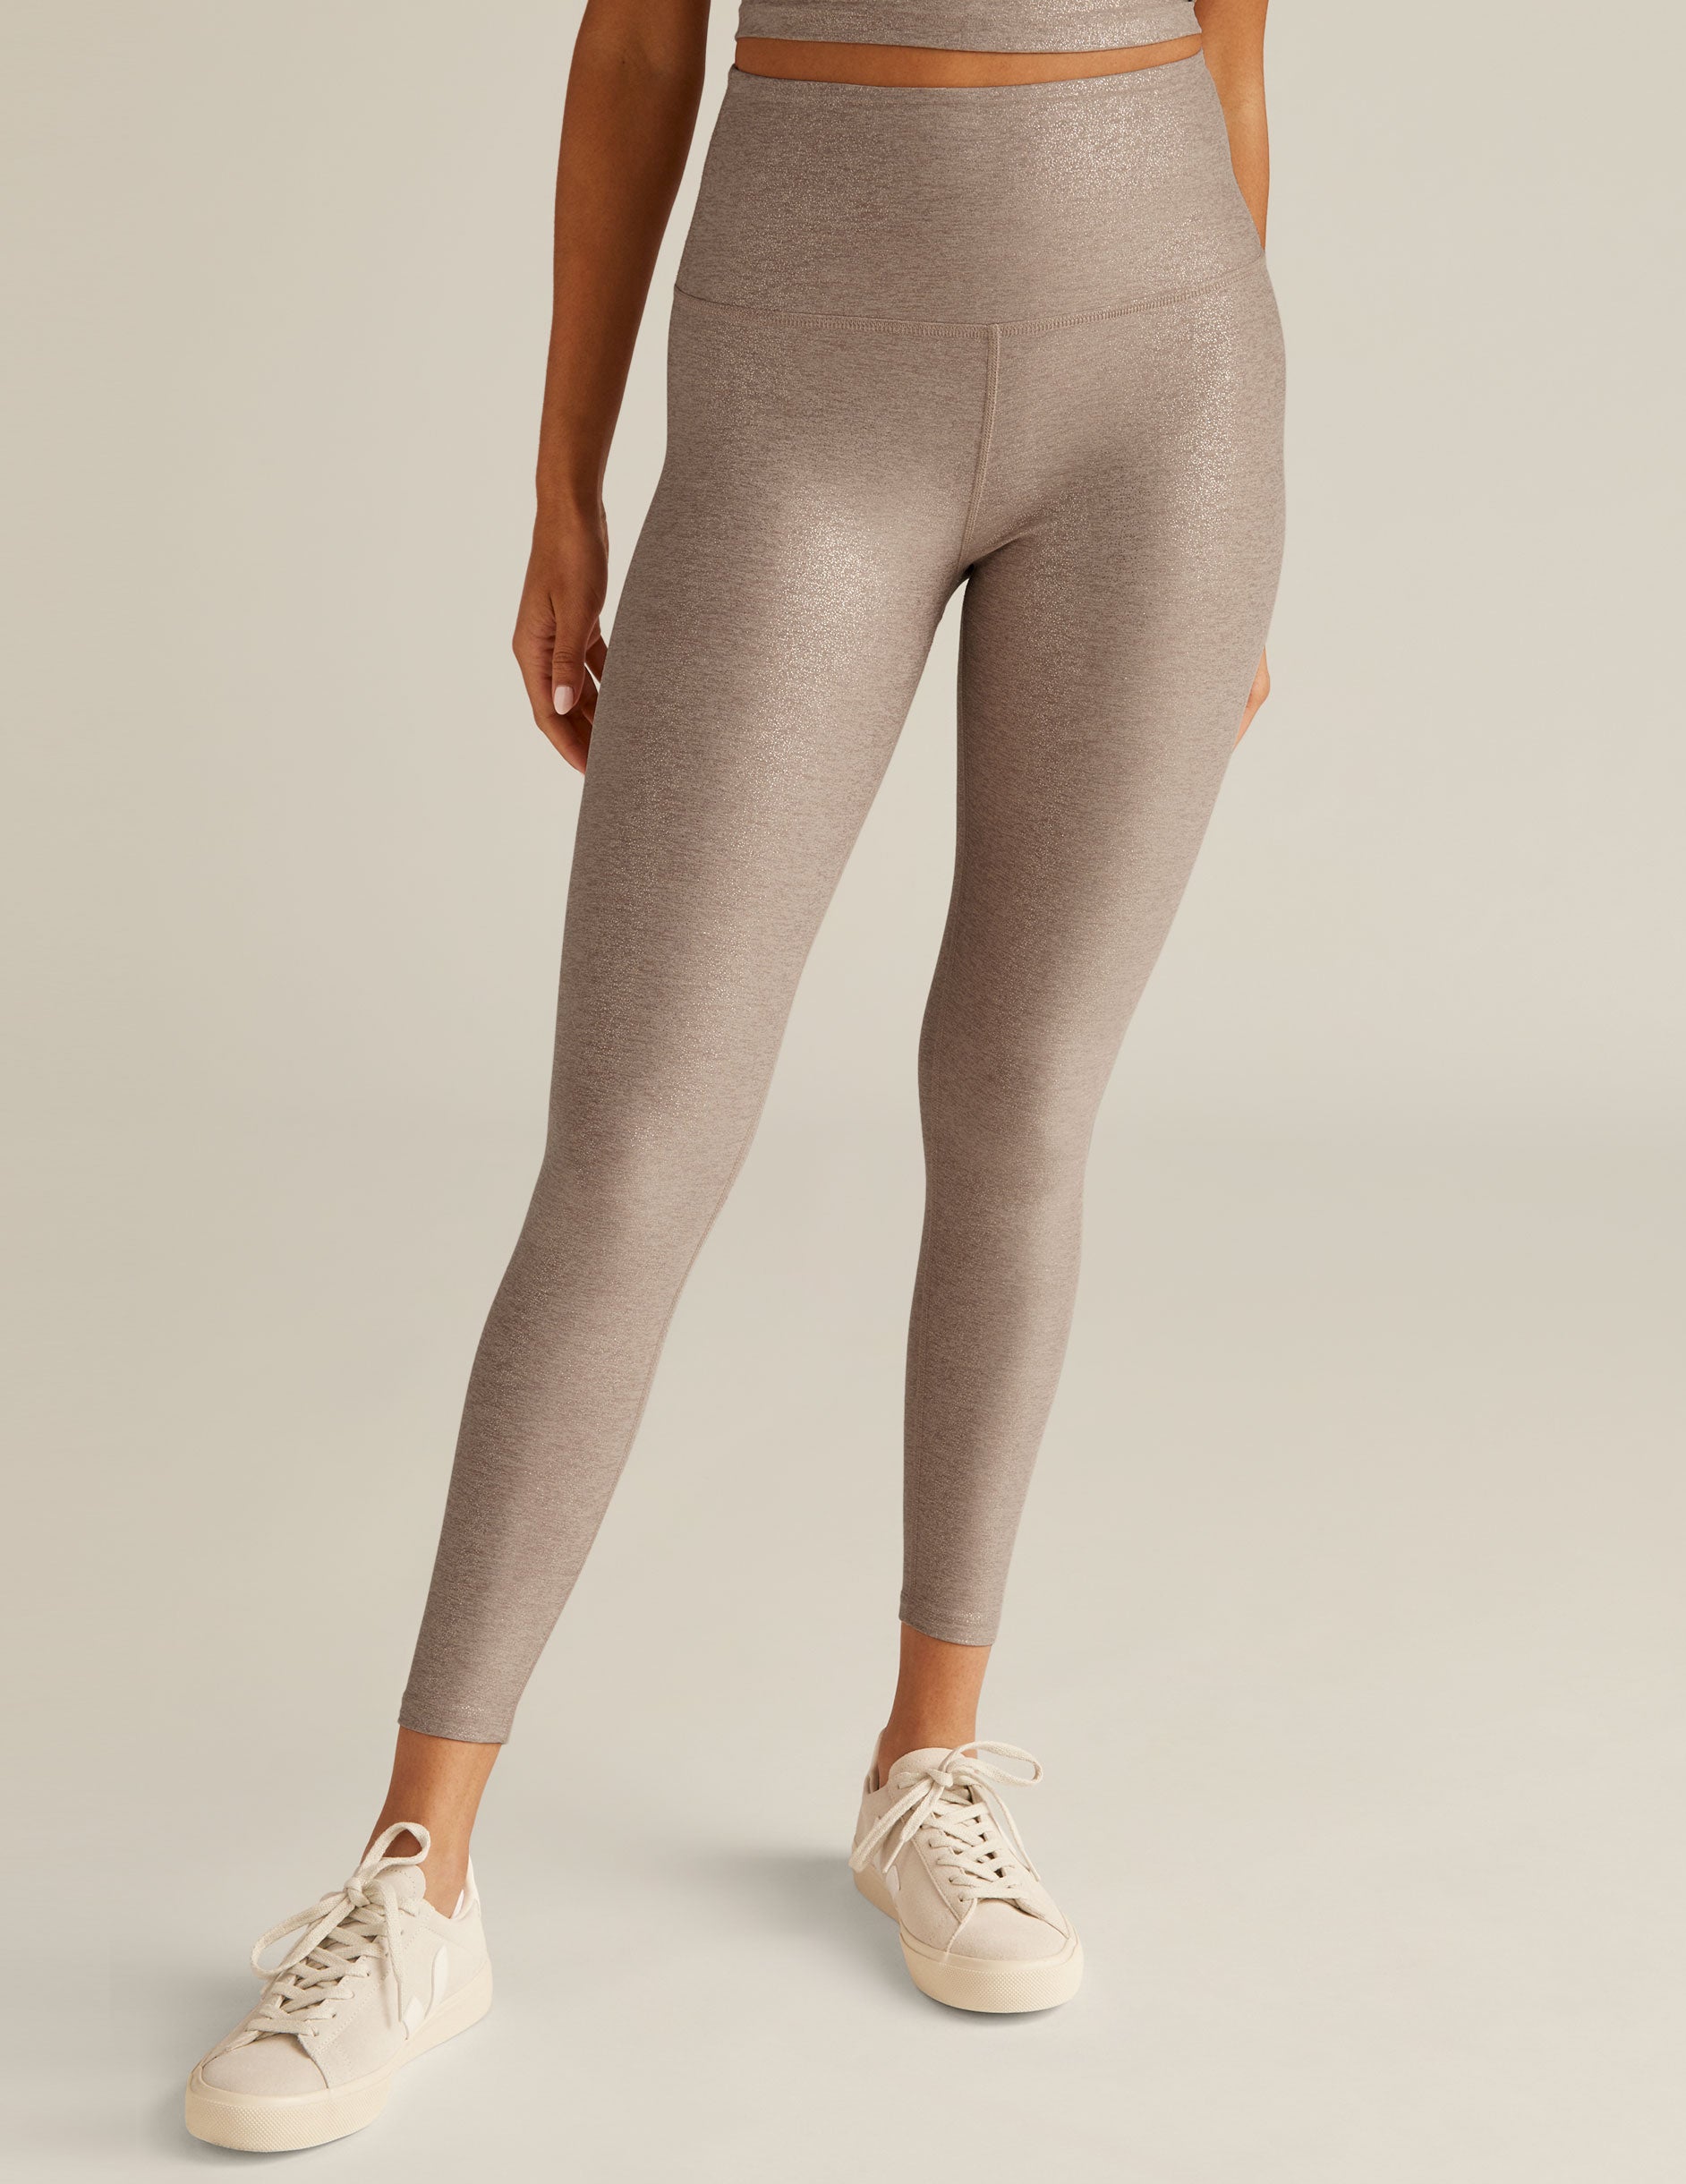 Urban Outfitters Beyond Yoga Softshine Sparkly High-Waisted Midi Legging